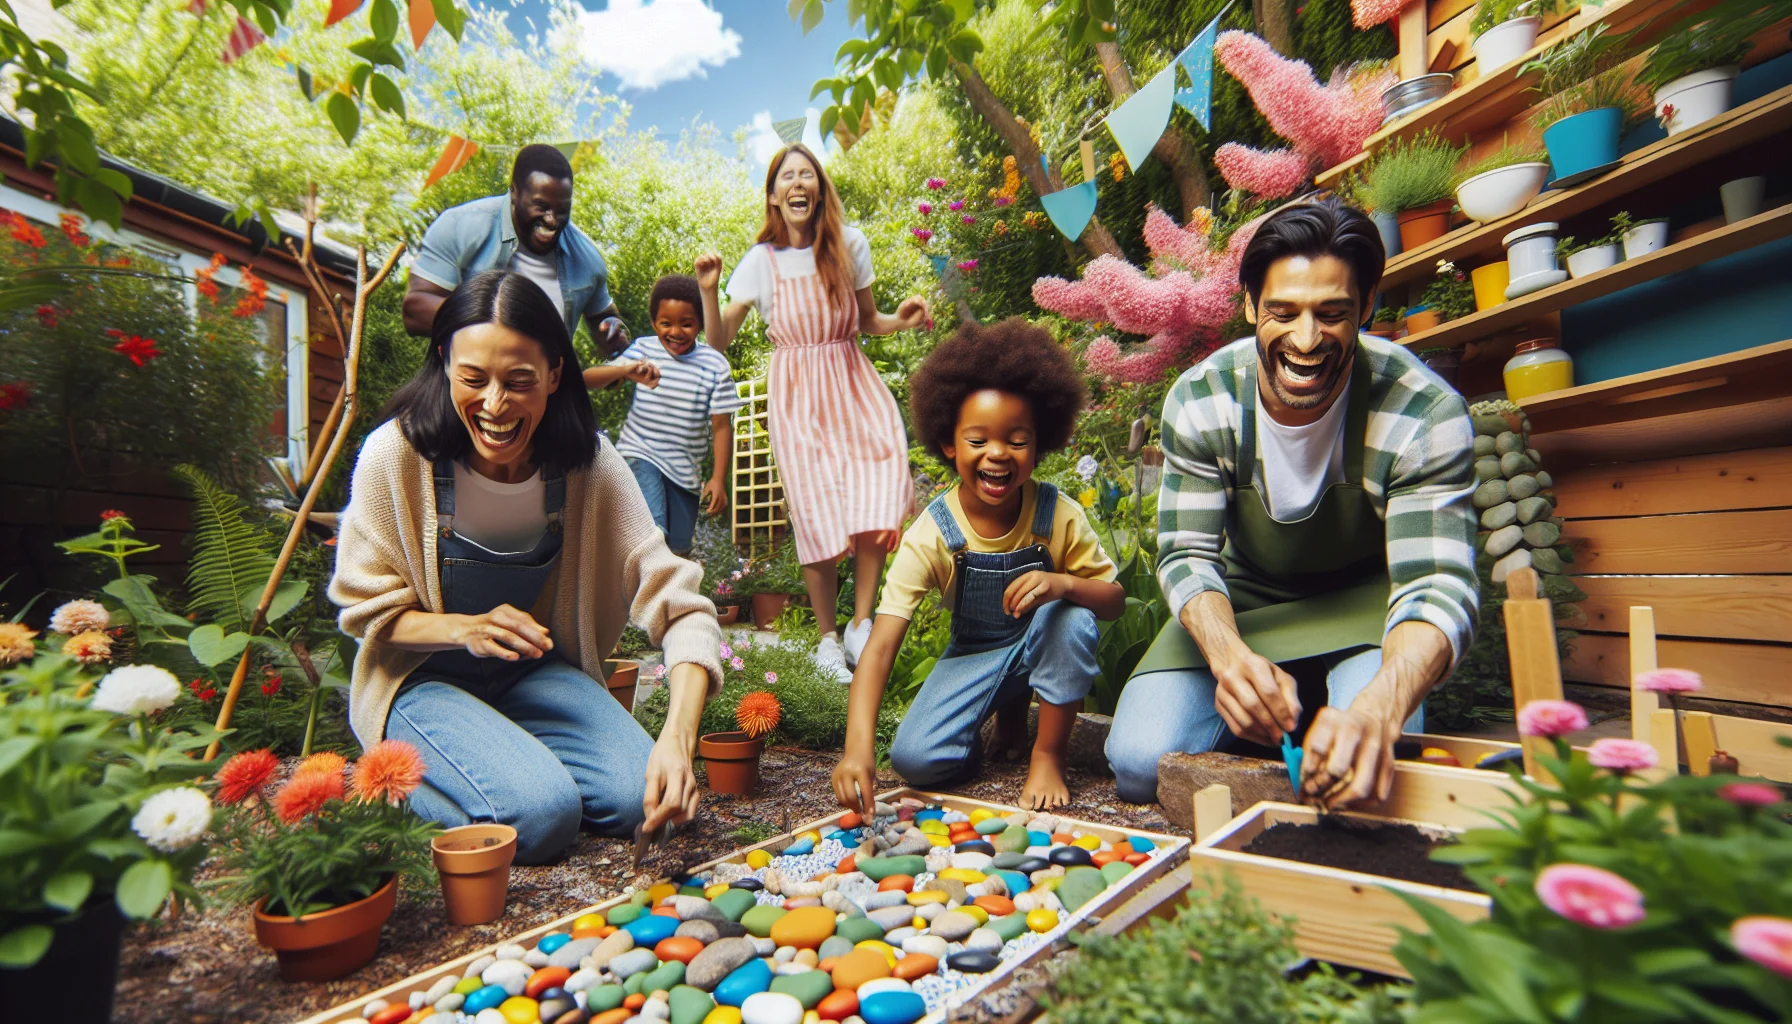 Imagine an amusement-filled scene taking place in the backyard garden. Amidst the vibrant green foliage and the blossoming flowers, a diverse group of people is indulging in a delightful DIY project. There's a black man eagerly laying down colorful garden stones, a Hispanic woman creatively designing a pattern with the stones, and a Caucasian child gleefully hopping from one stone to another. The atmosphere is full of joy and laughter that is contagious enough to make anyone fall in love with gardening.